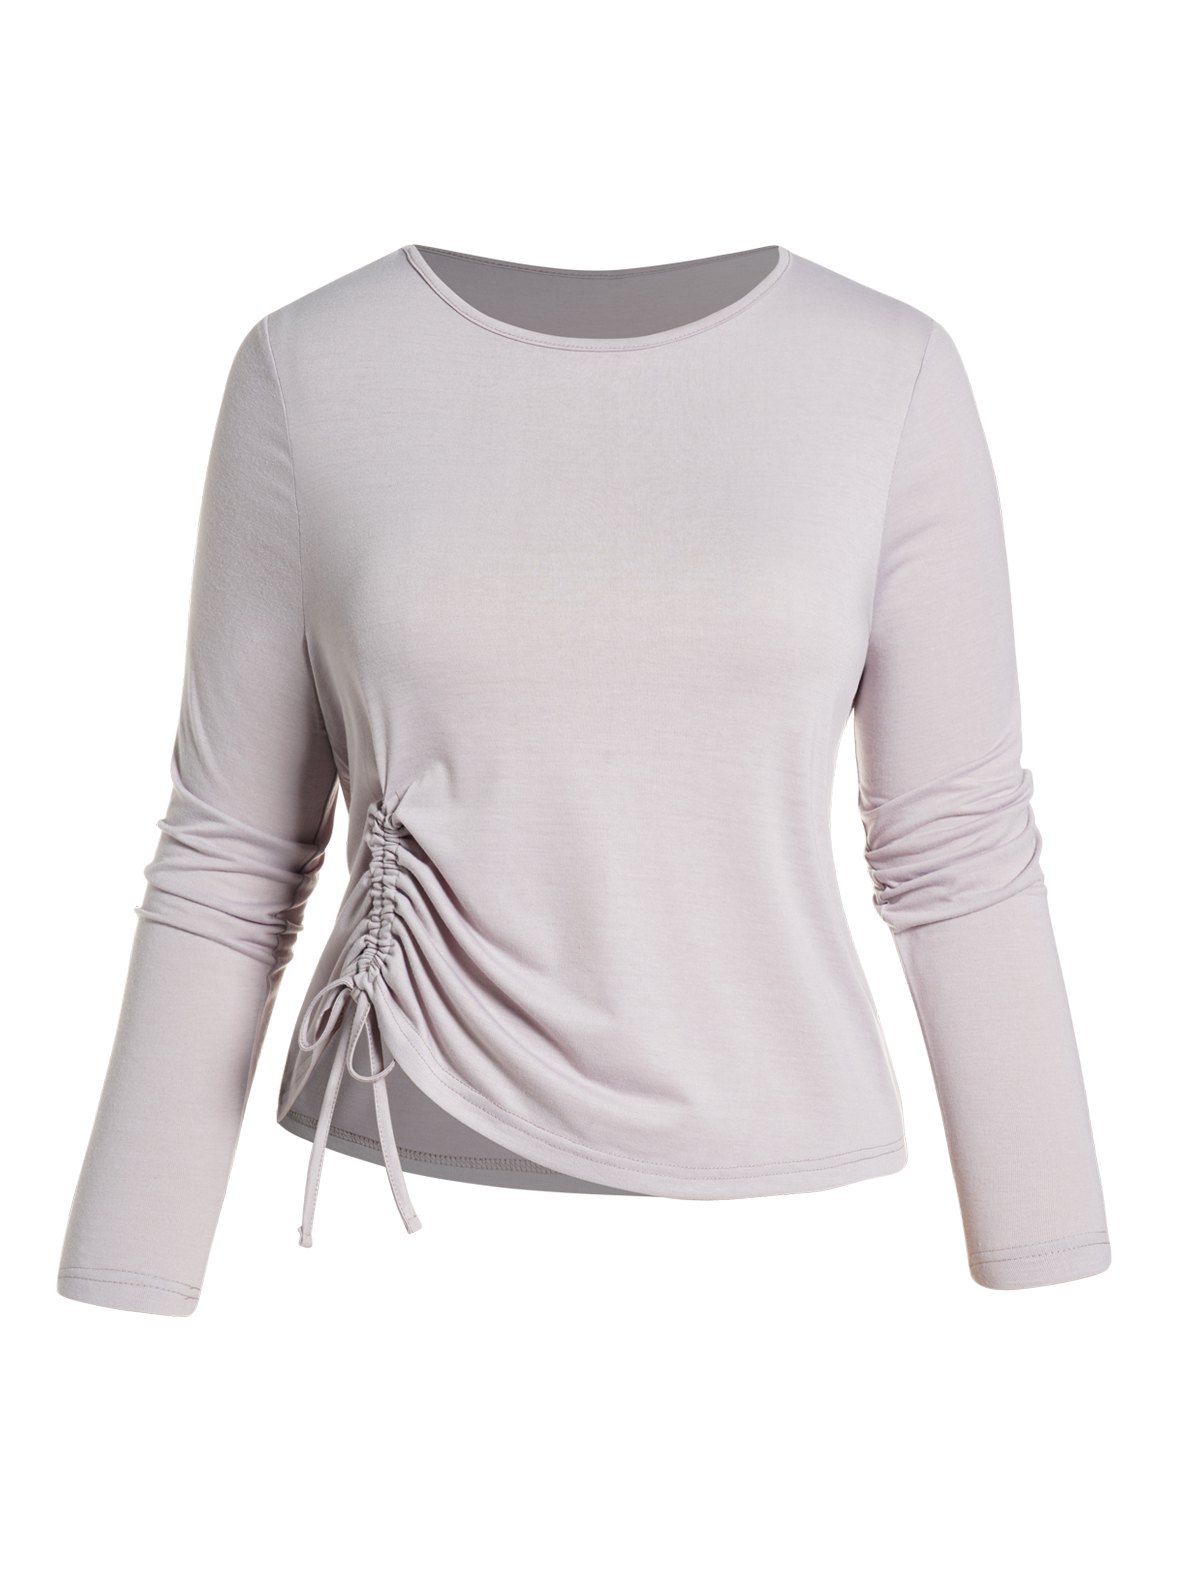 Plus Size Solid Color Cinched T-shirt Long Sleeve Round Neck Casual Curve Tee - LIGHT GRAY 4XL